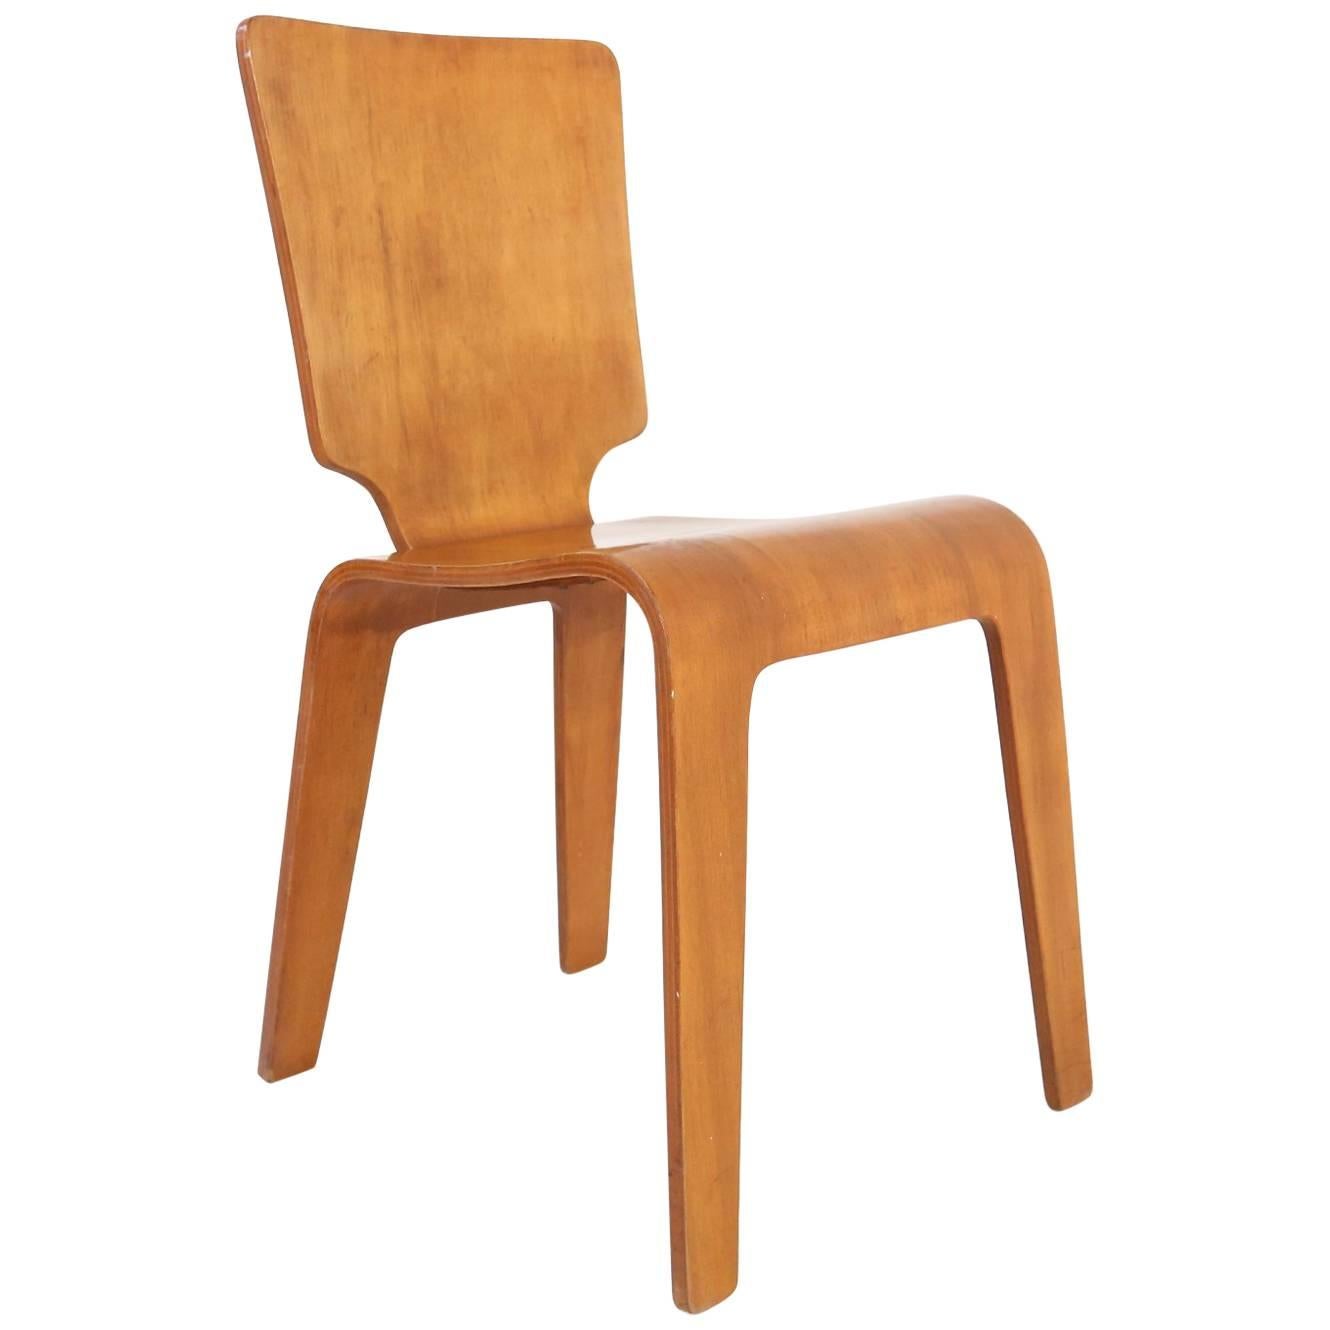 Bent Plywood Side Chair by Thaden-Jordan Furniture, 1940s / Han Pieck Style